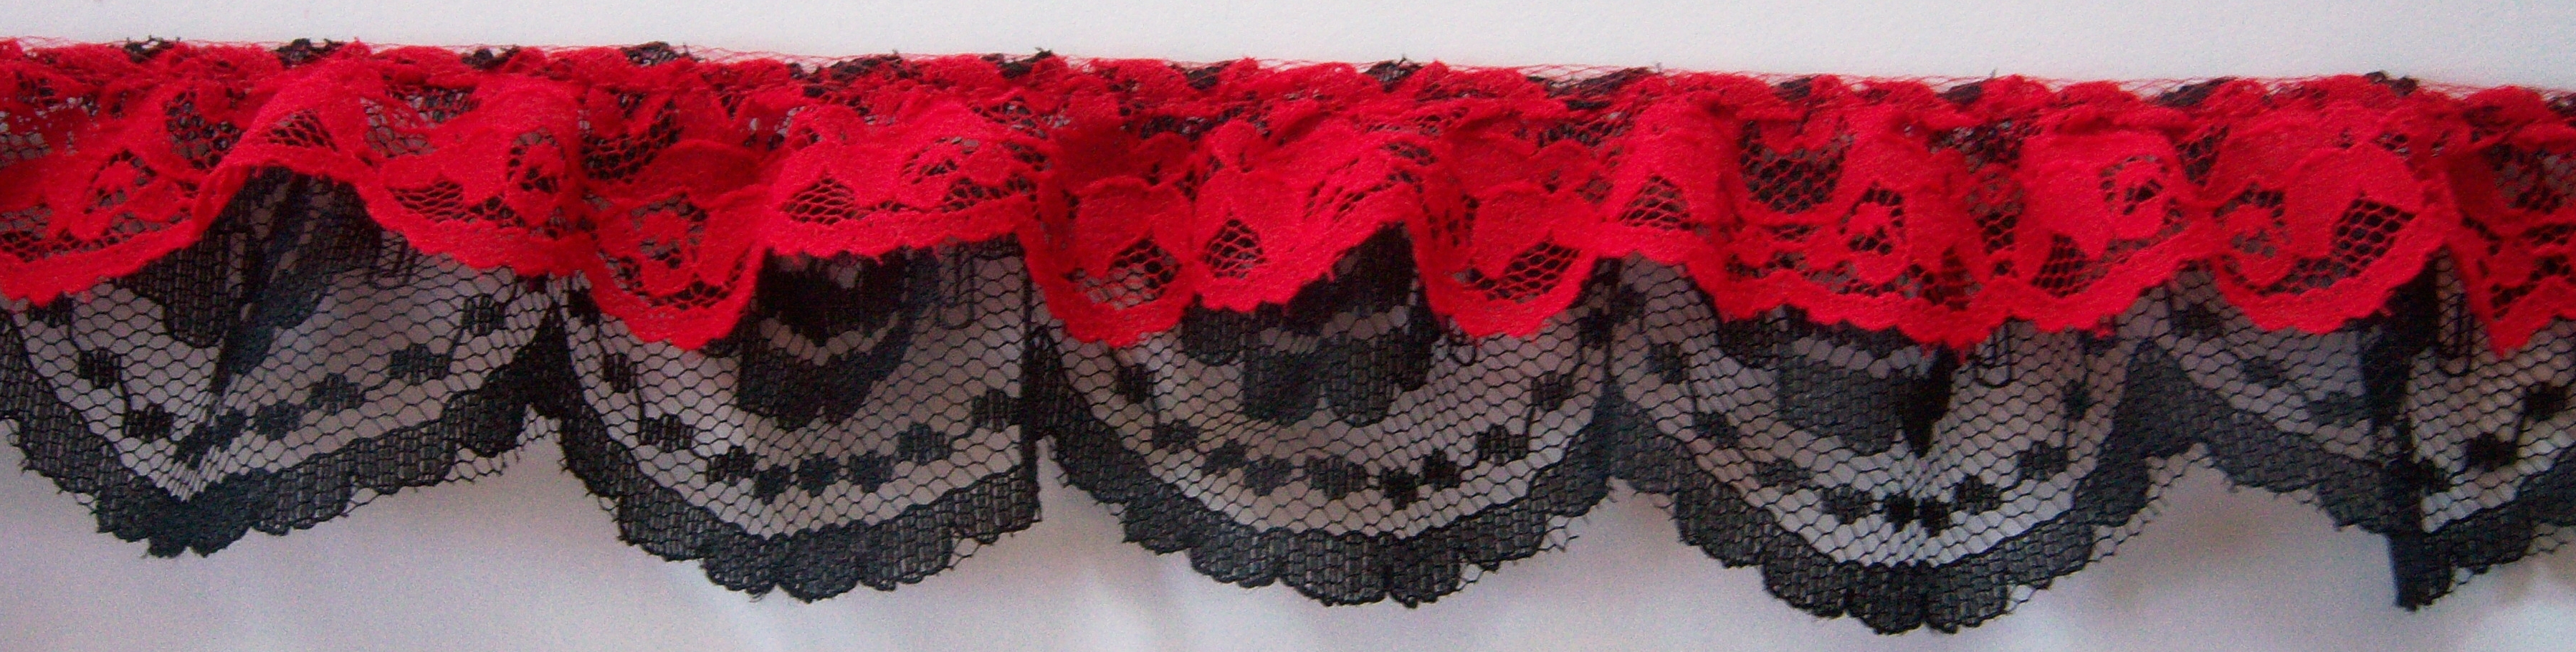 Red/Black Double Gathered Lace